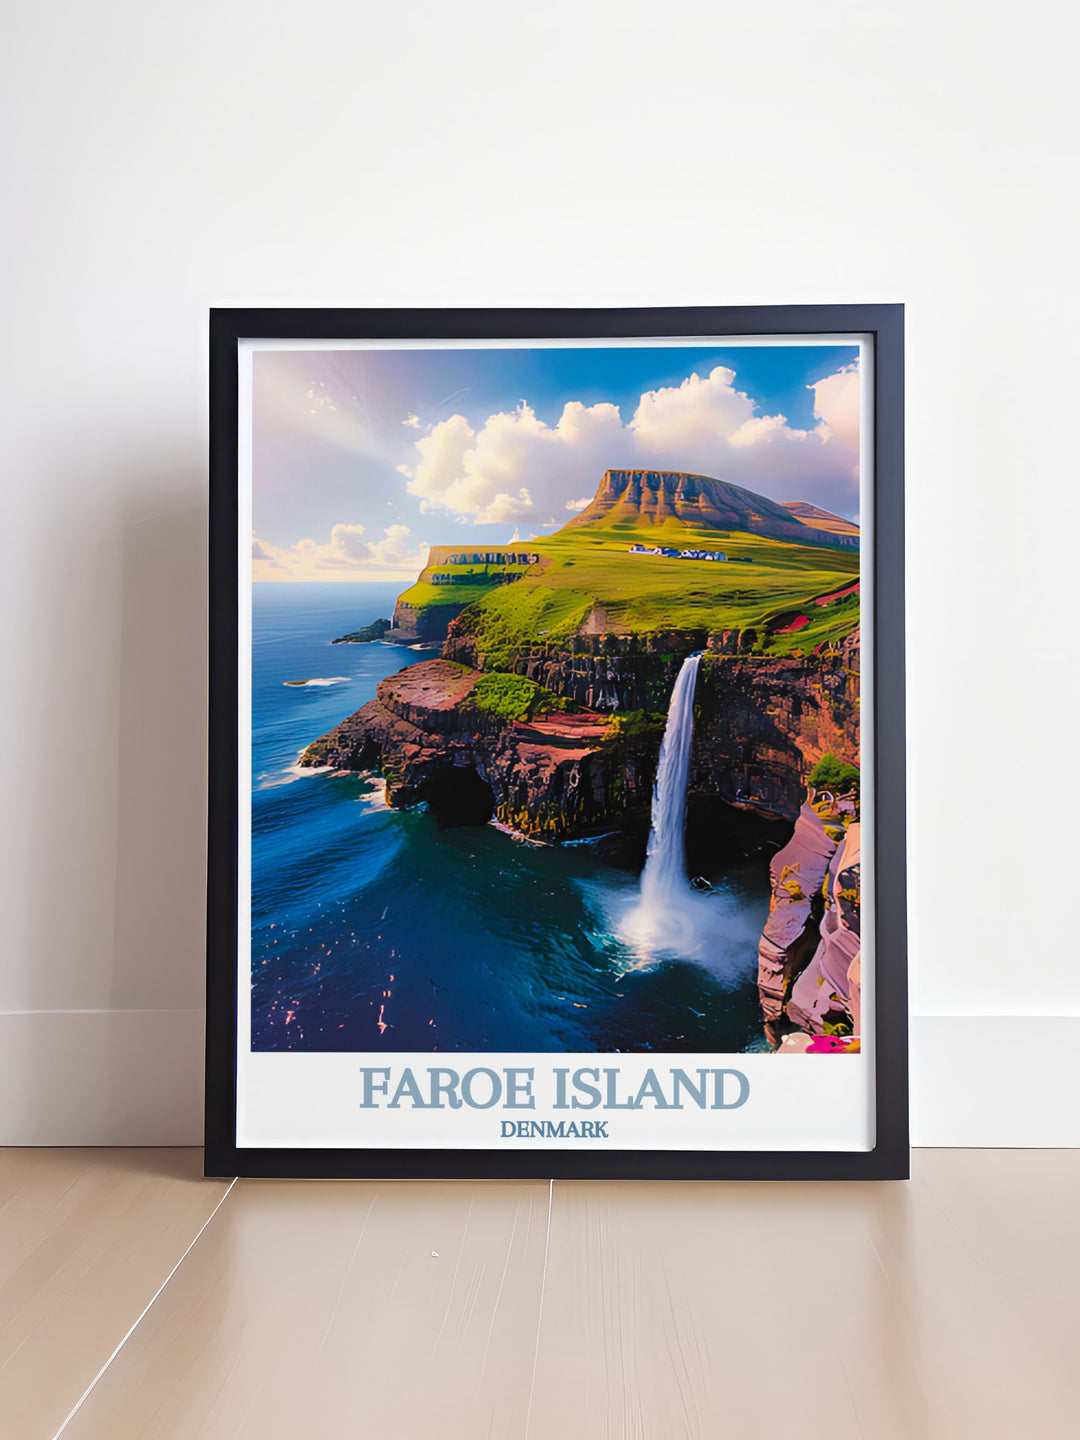 Featuring Múlafossur Waterfall, this art print showcases the majestic plunge and serene landscape of one of the Faroe Islands most iconic waterfalls, making it ideal for nature enthusiasts and art lovers alike.